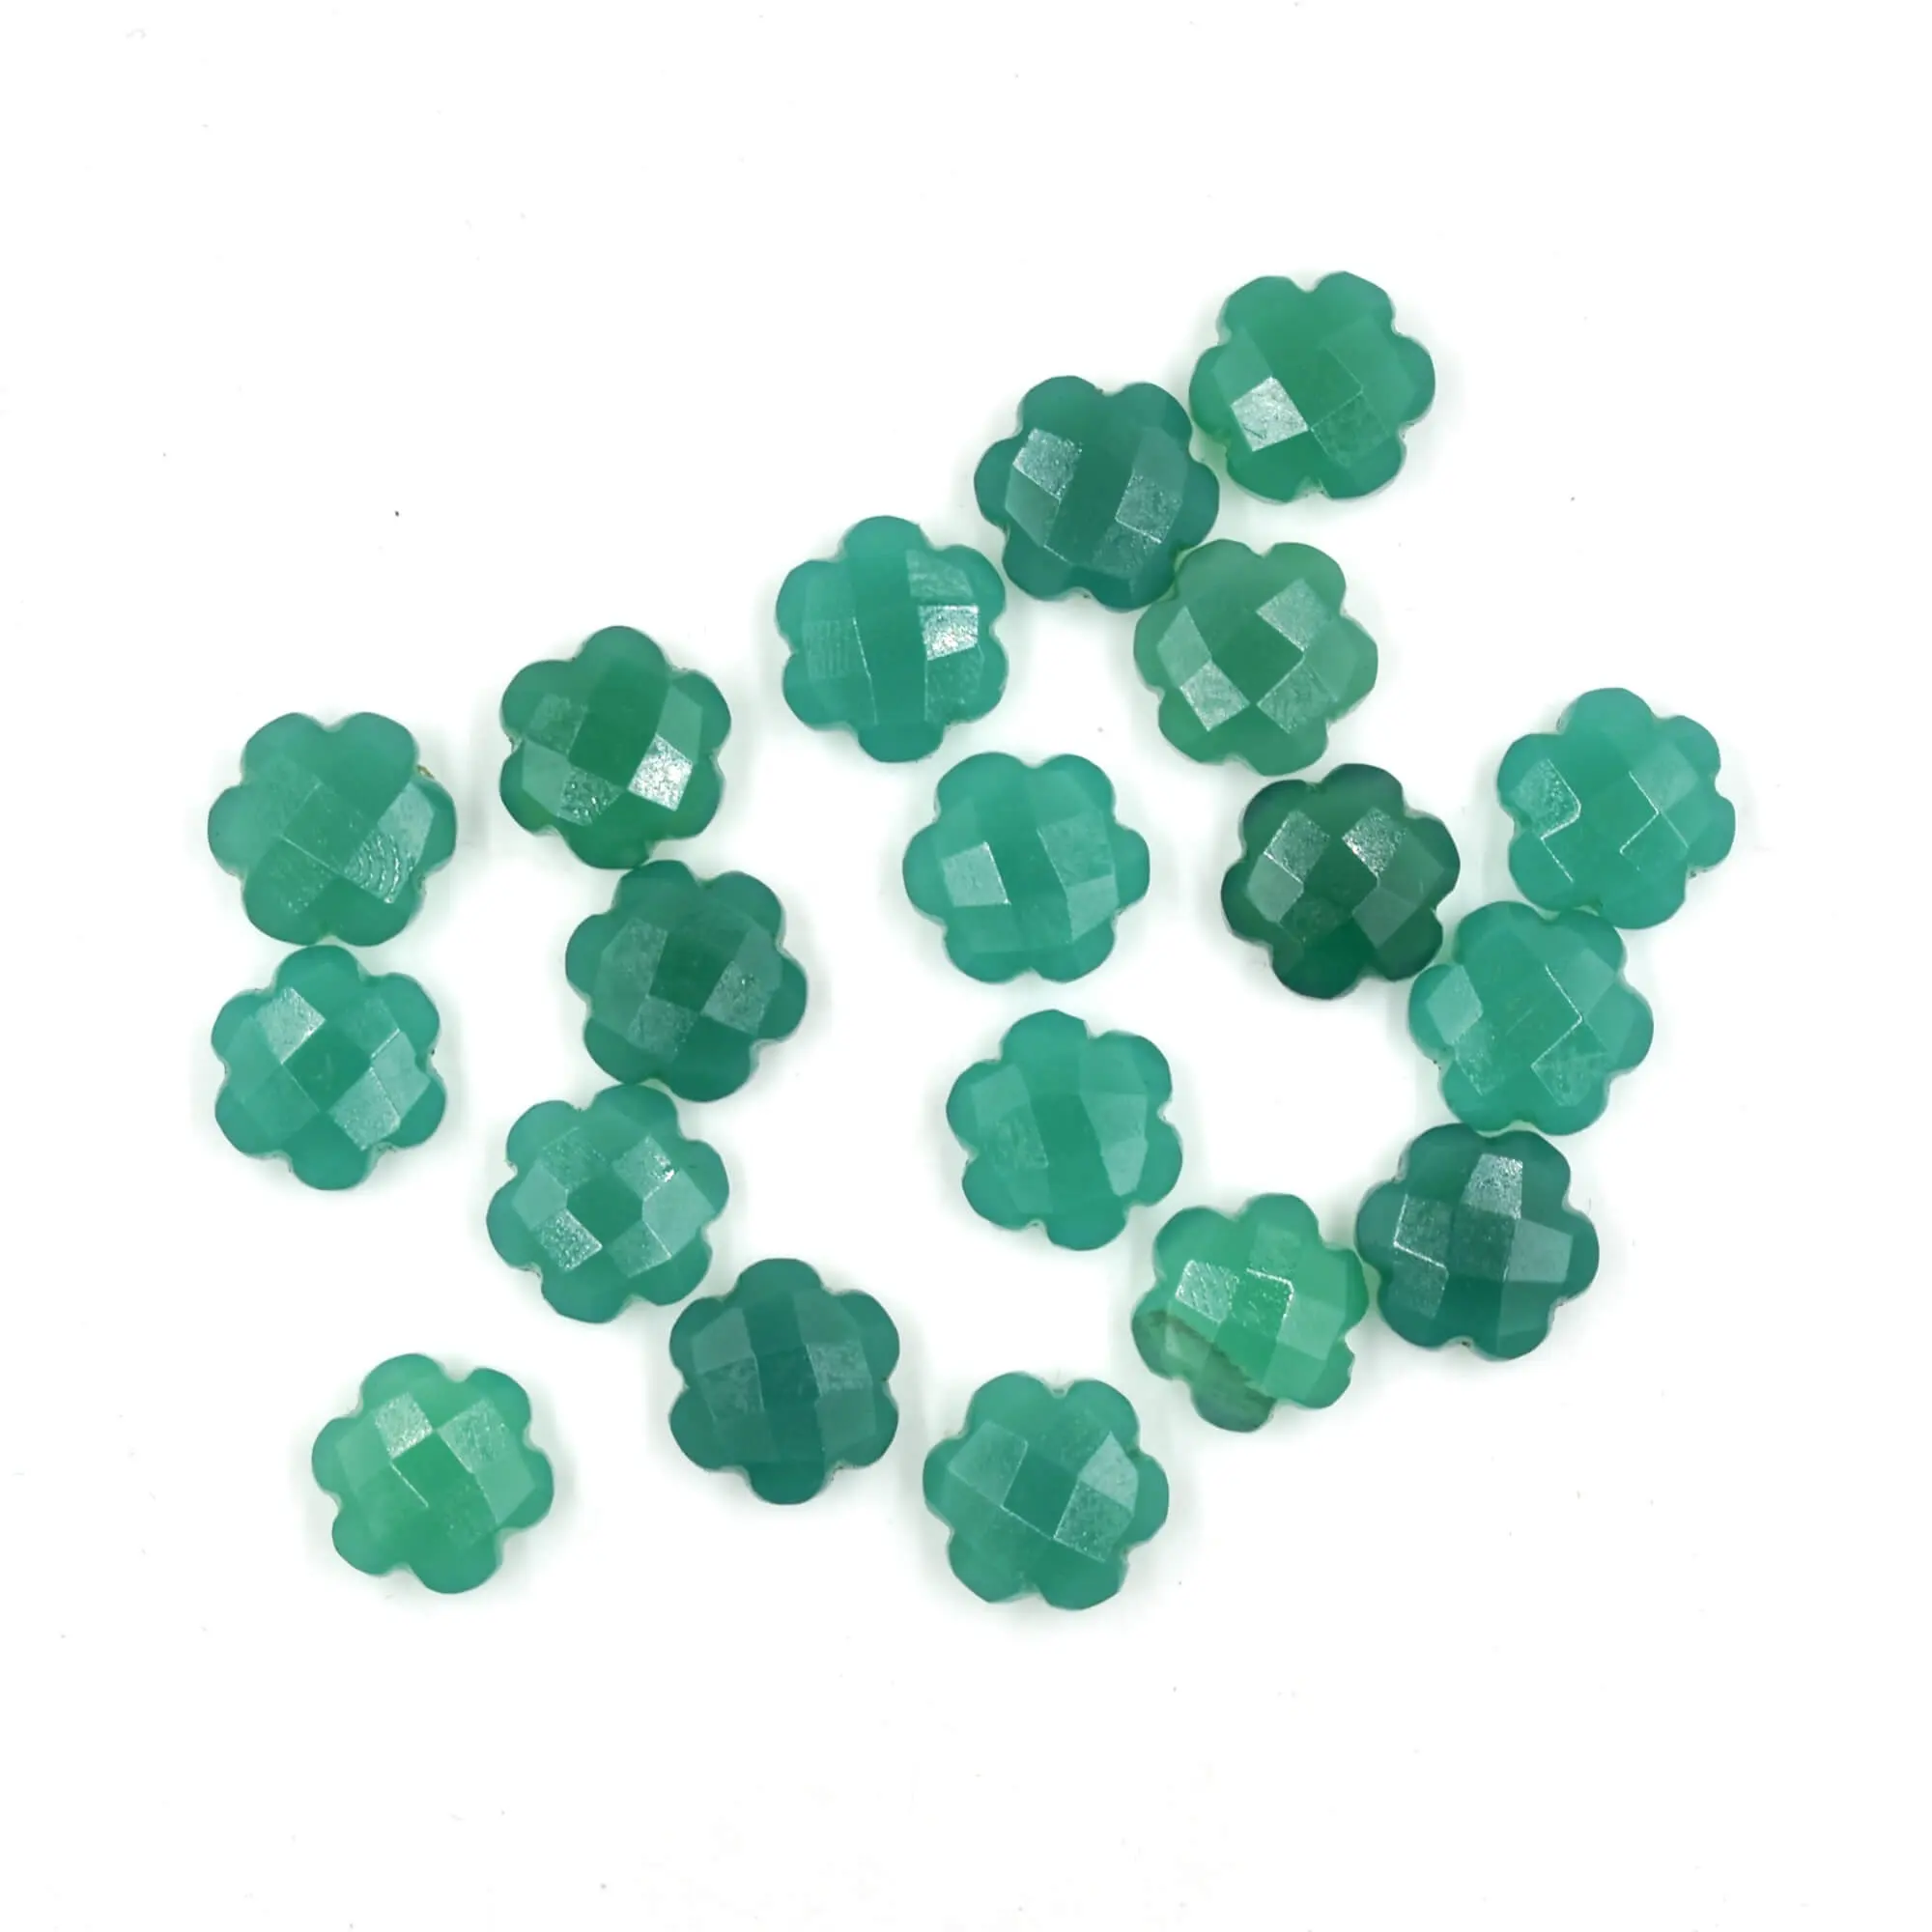 6 Petals Flower Cared Stone, Green Onyx Loose Briolette Stone Beads, Green Gemstone Beads